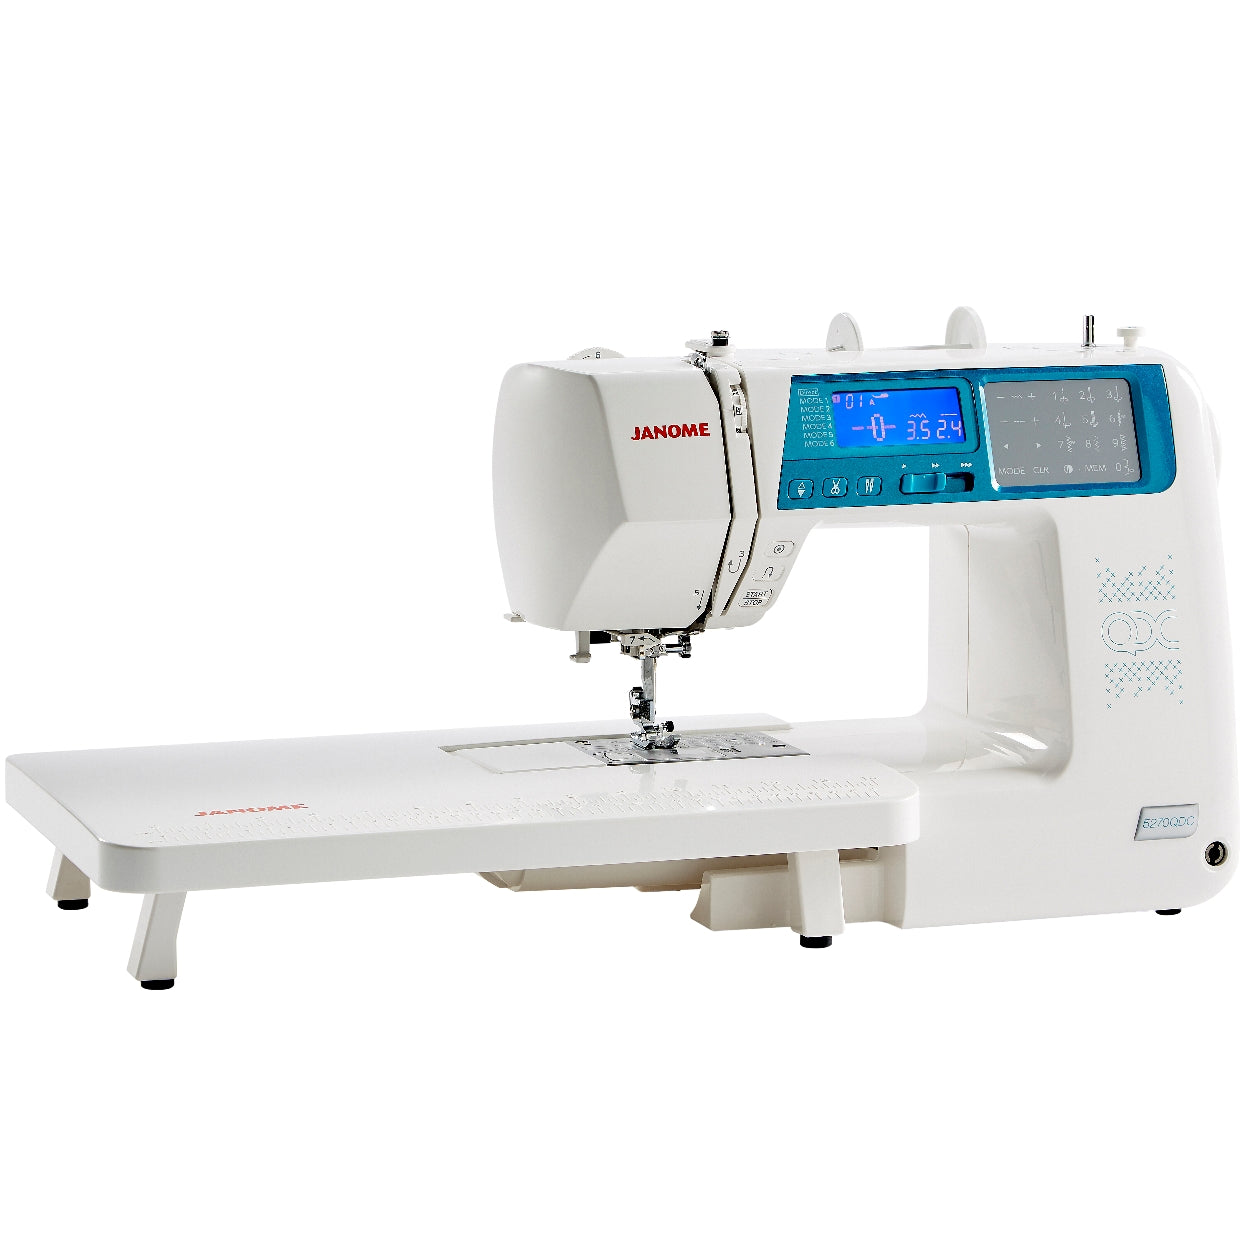 Janome 5270QDC sewing machine with extension sew table included | Jaycotts.co.uk